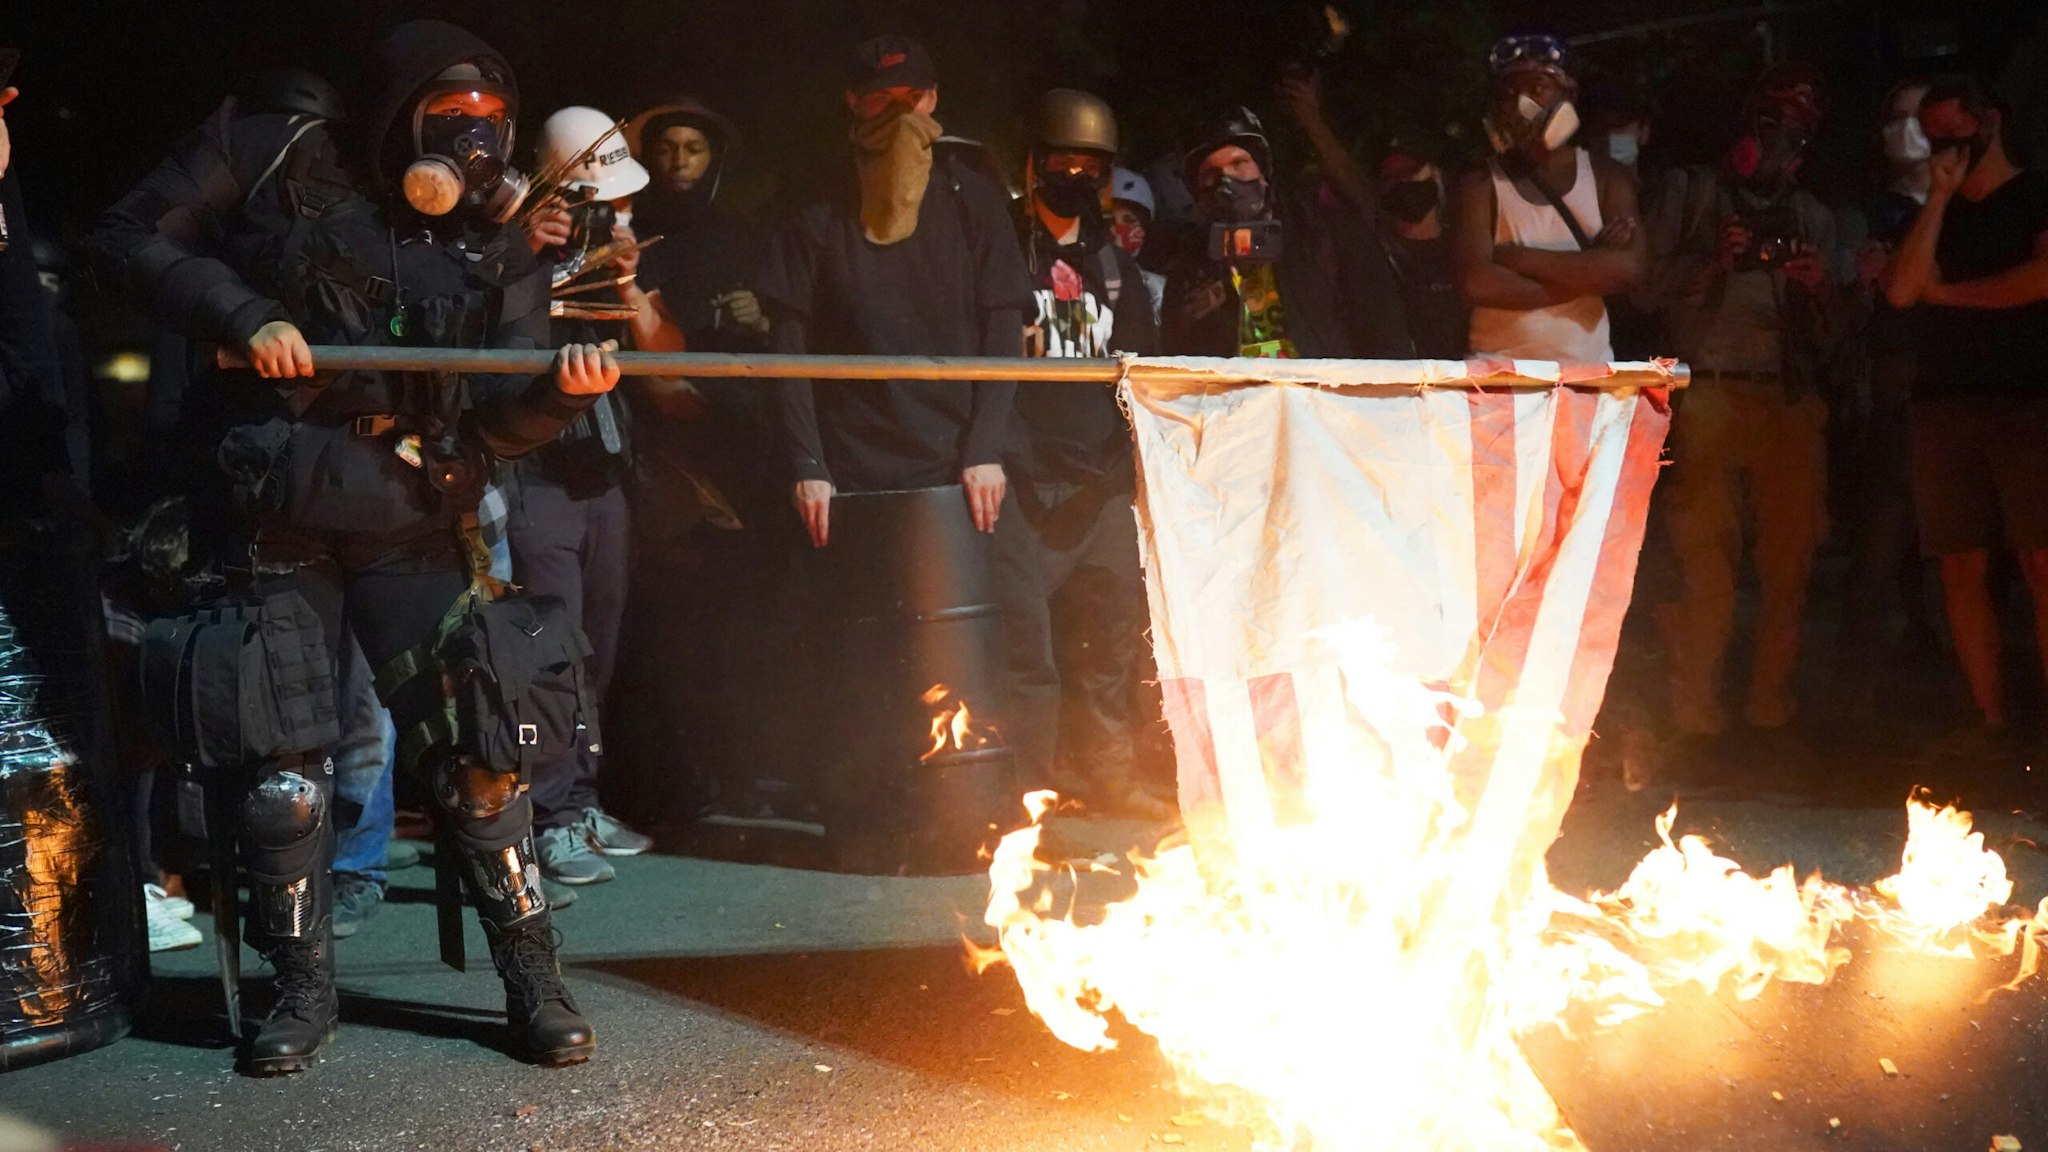 A protester burns an American flag in front of the Mark O. Hatfield U.S. Courthouse in the early morning on August 1, 2020 in Portland, Oregon. Friday was the second night in a row without police intervention, following weeks of clashes between federal officers and protesters in Portland.